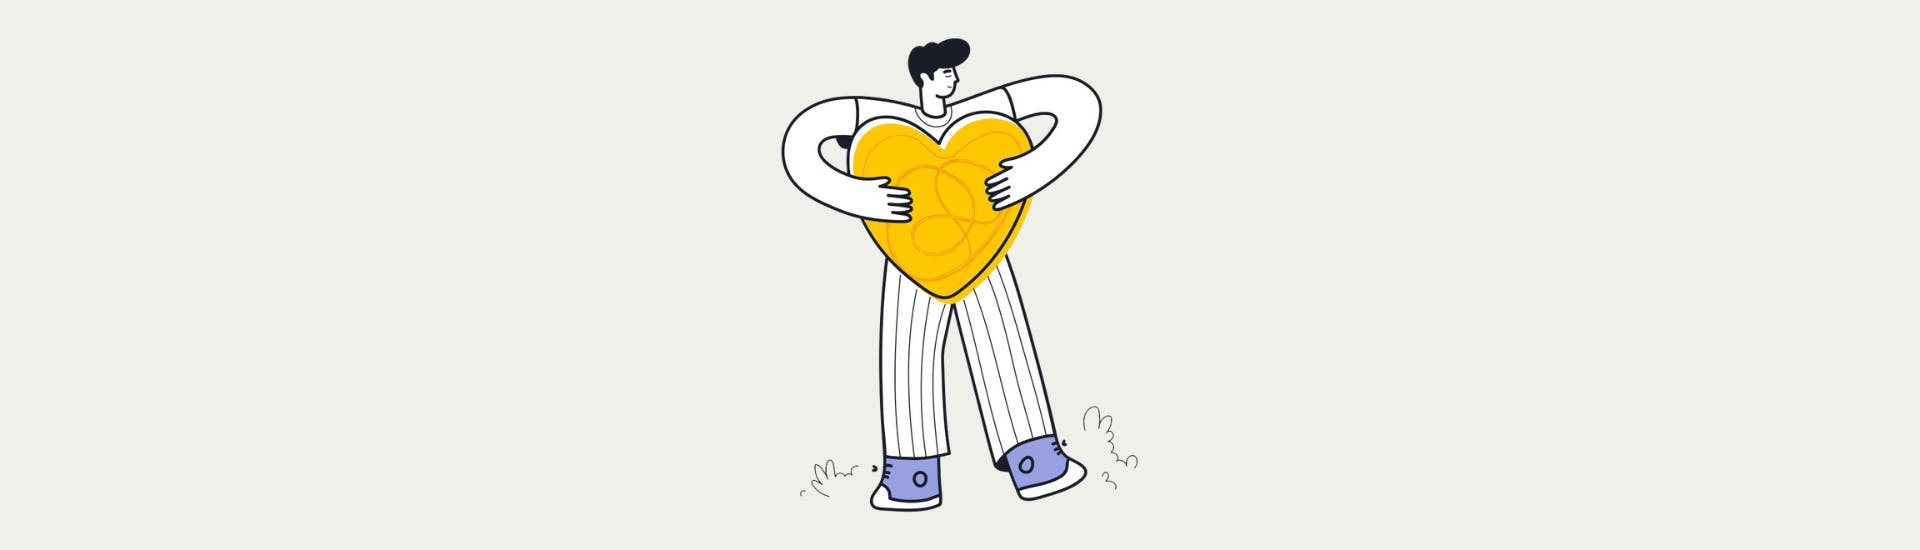 Illustration. Boy holds a big yellow heart to his chest.